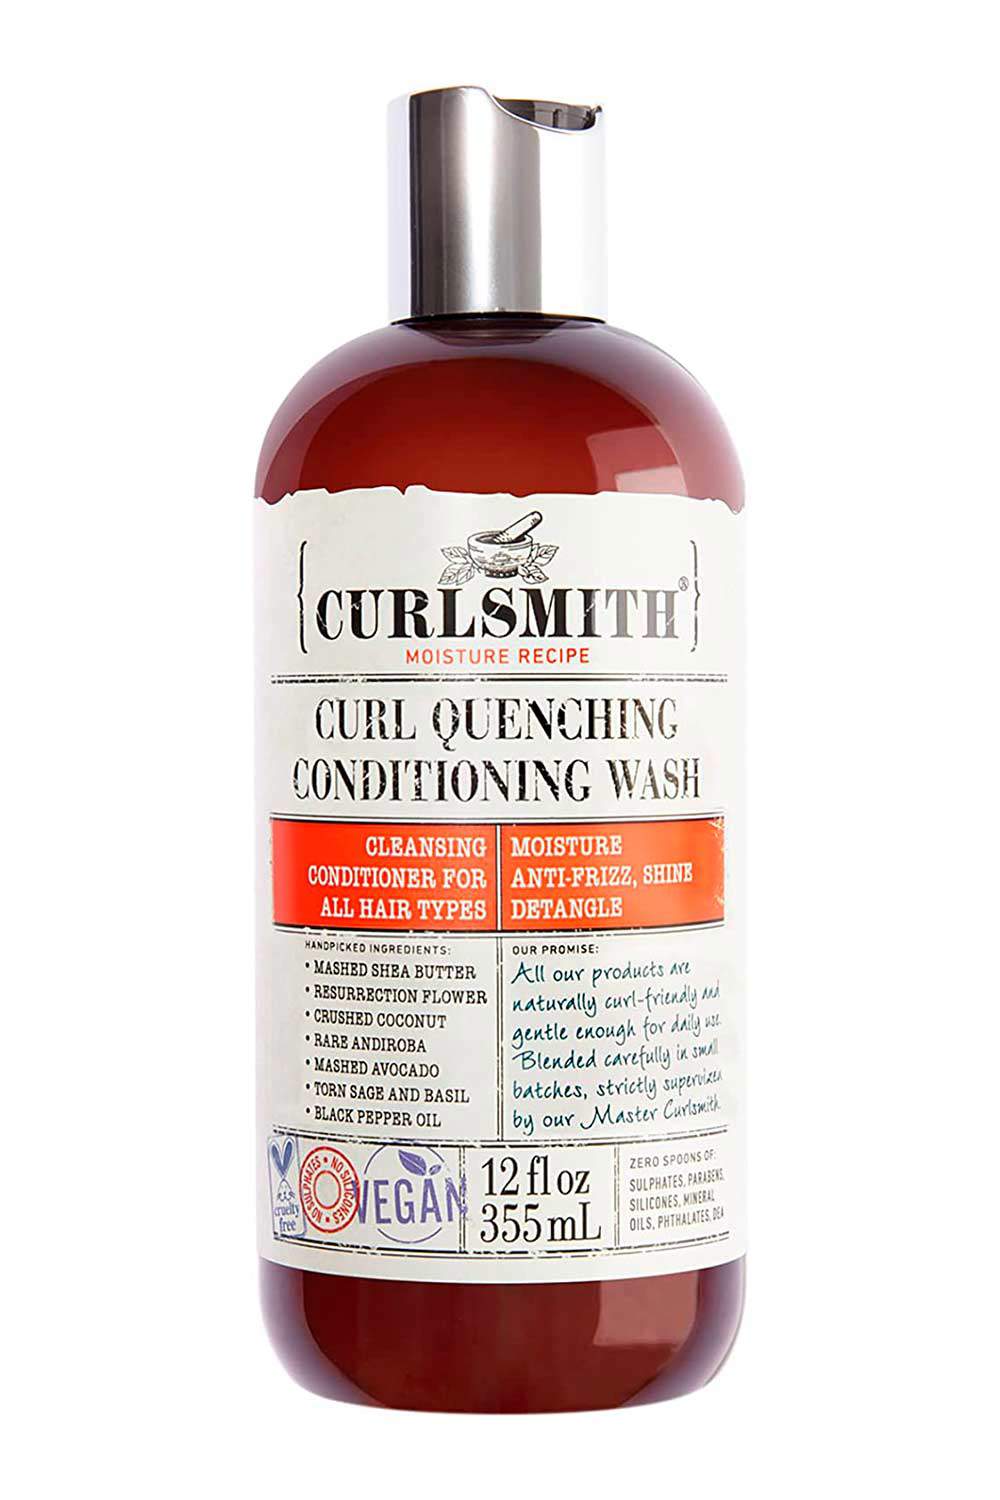 Curl Quenching Conditioning Wash, Curlsmith